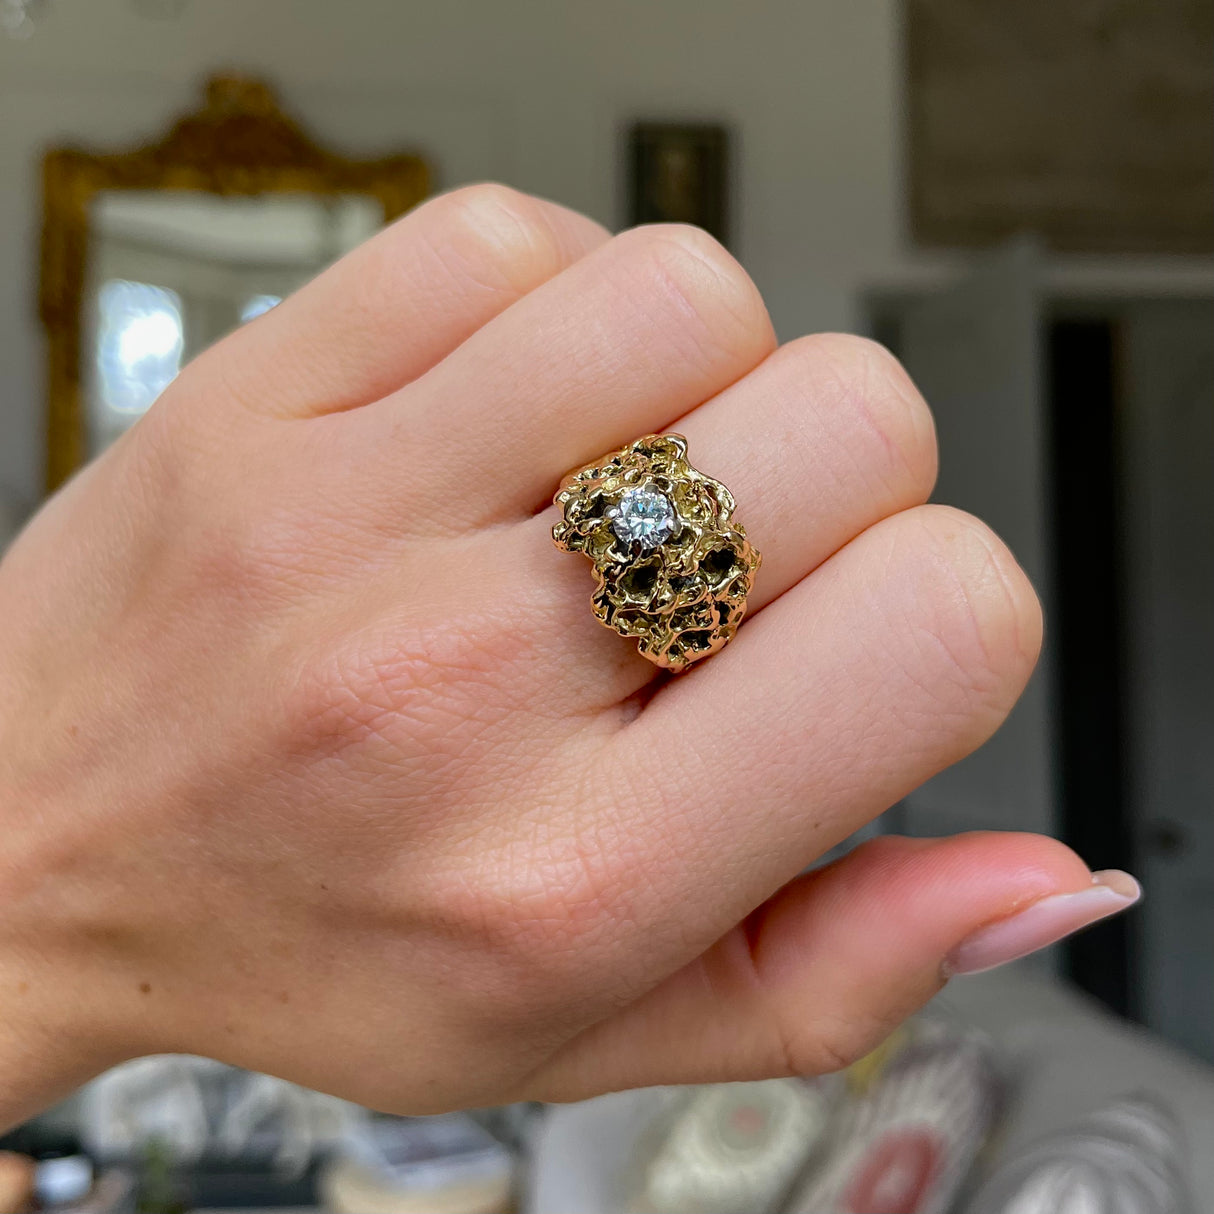 Vintage textured 18ct yellow gold nugget diamond ring, worn on hand.